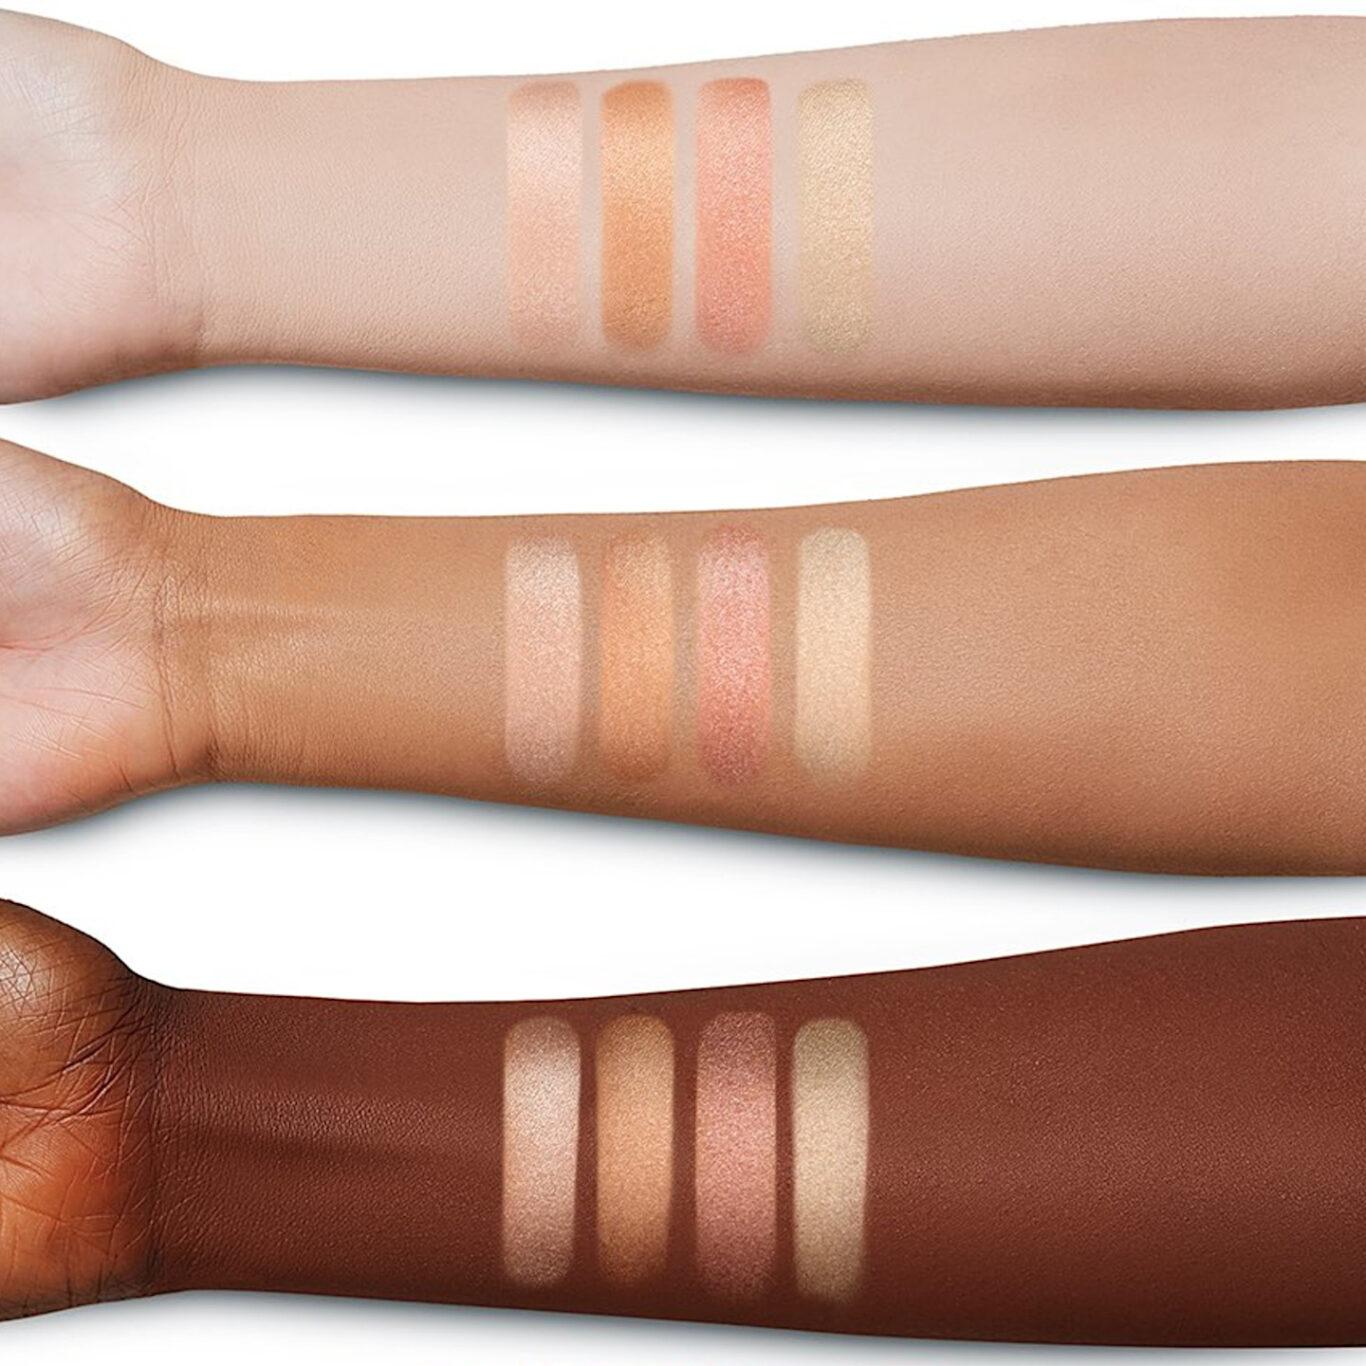 Charlotte Tilbury Pillow Talk Party Collection Pillow Talk Multi Glow Dream Light Arm Swatches